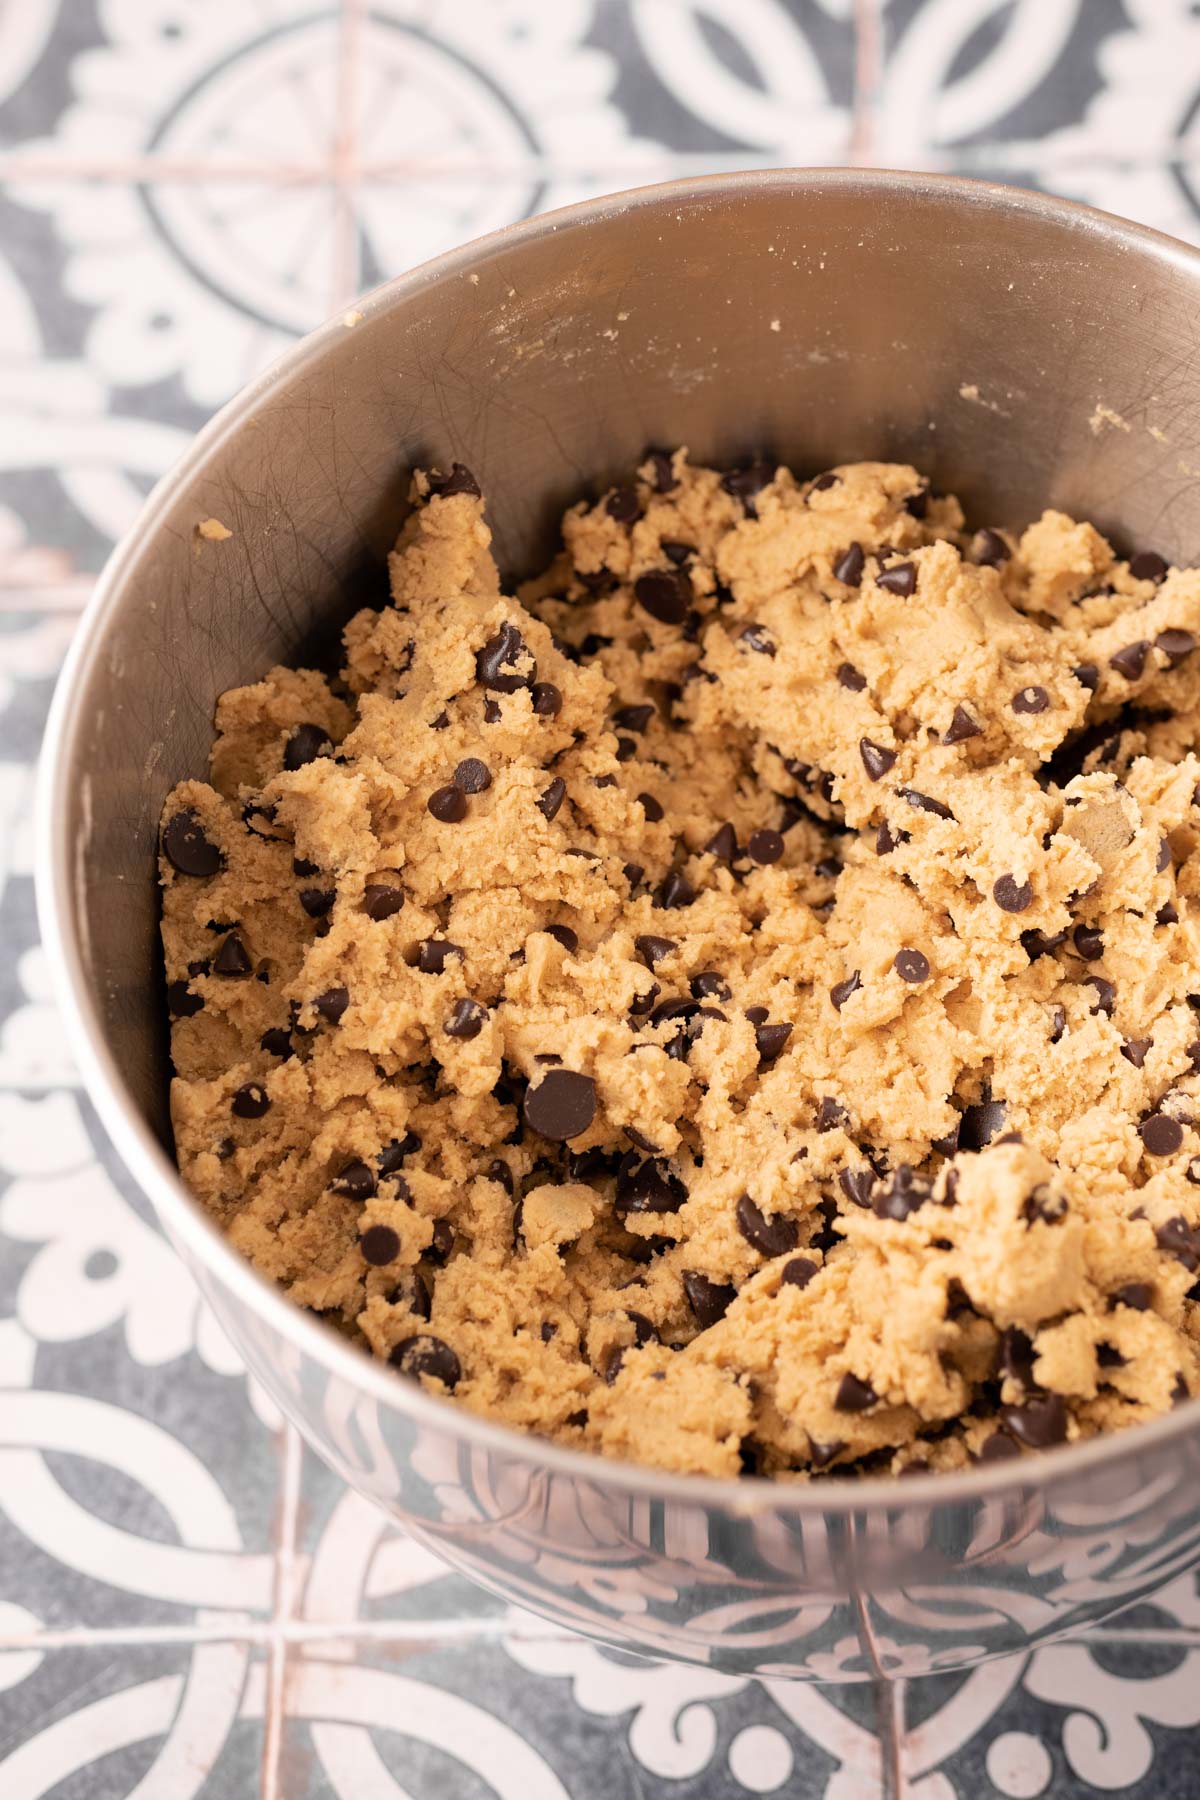 Cookie dough in a stainless steel mixing bowl.